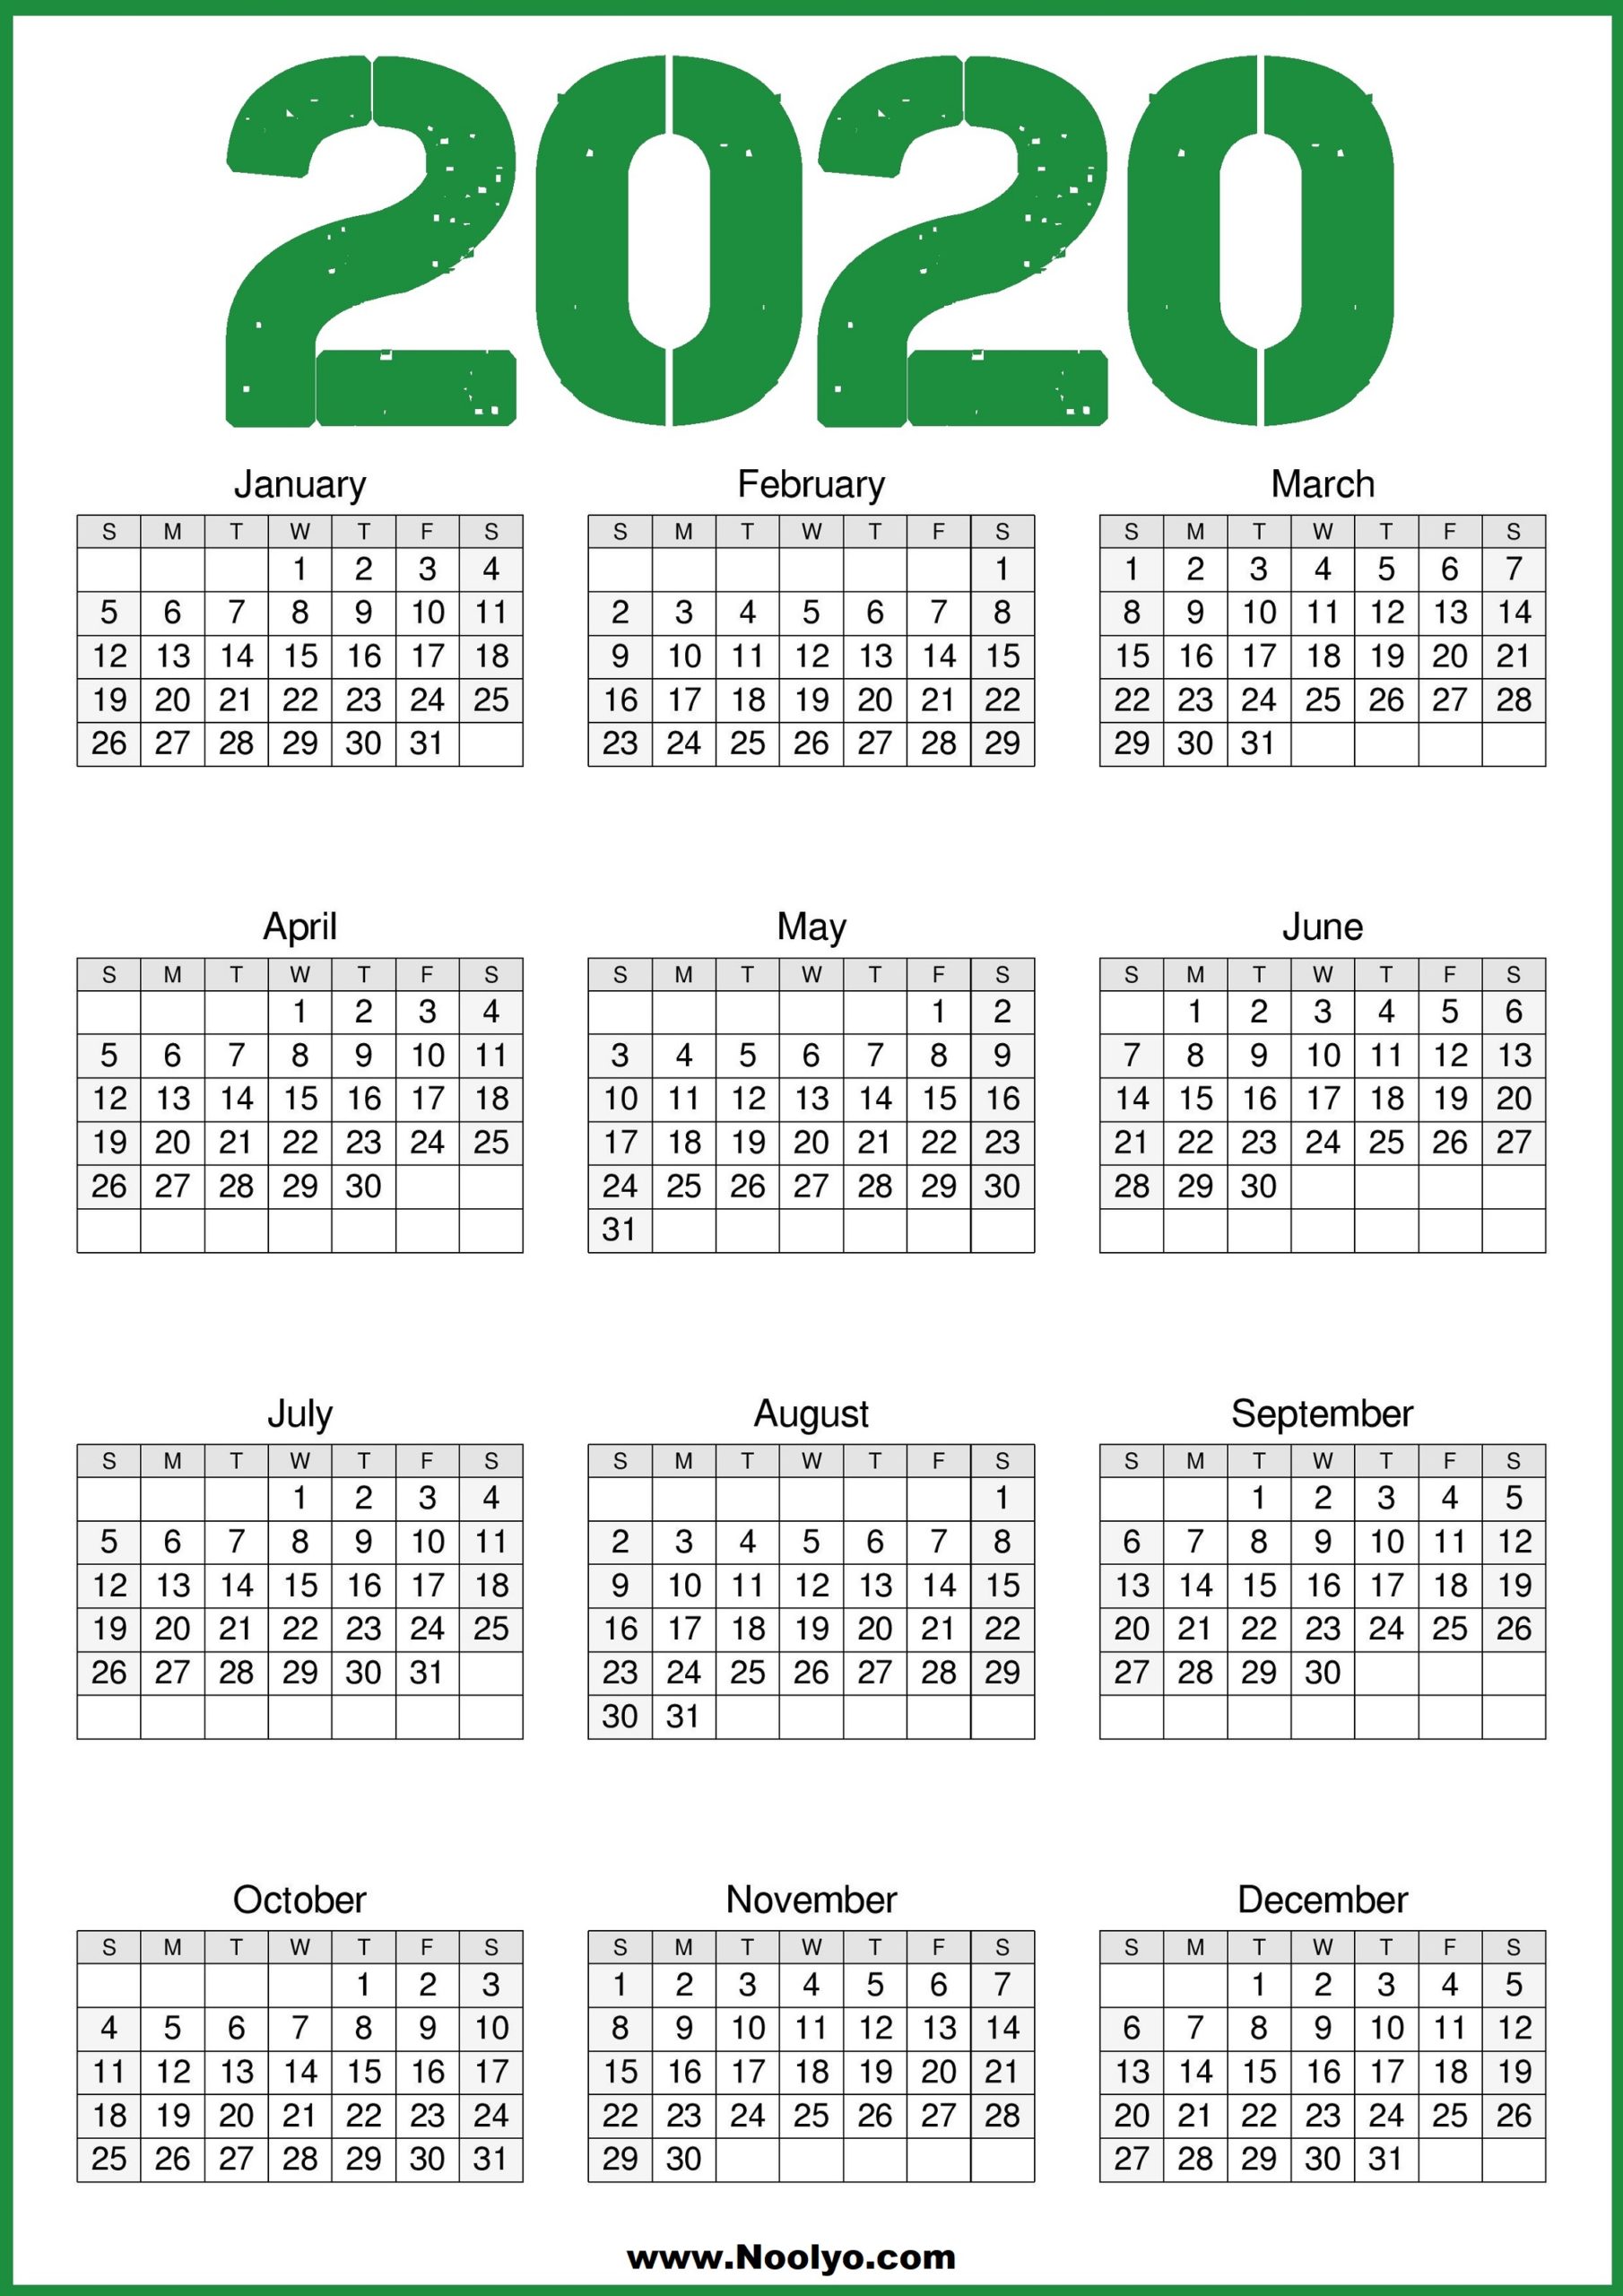 2020 Calendar One Page Free Download